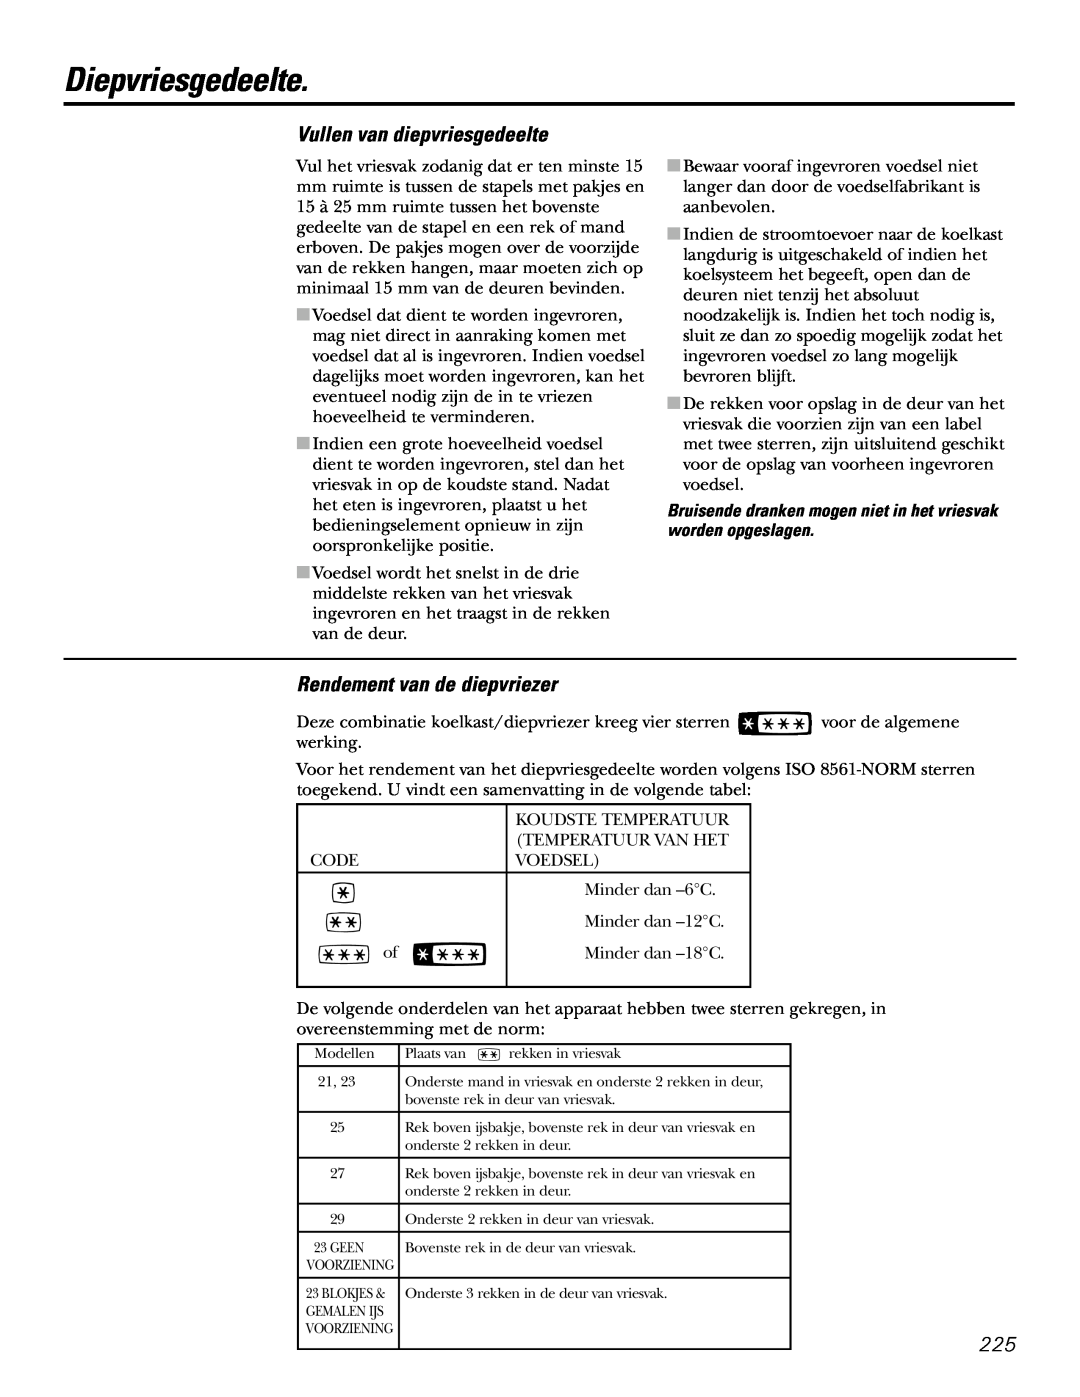 GE 200D2600P031 operating instructions Diepvriesgedeelte, Vullen van diepvriesgedeelte, Rendement van de diepvriezer 